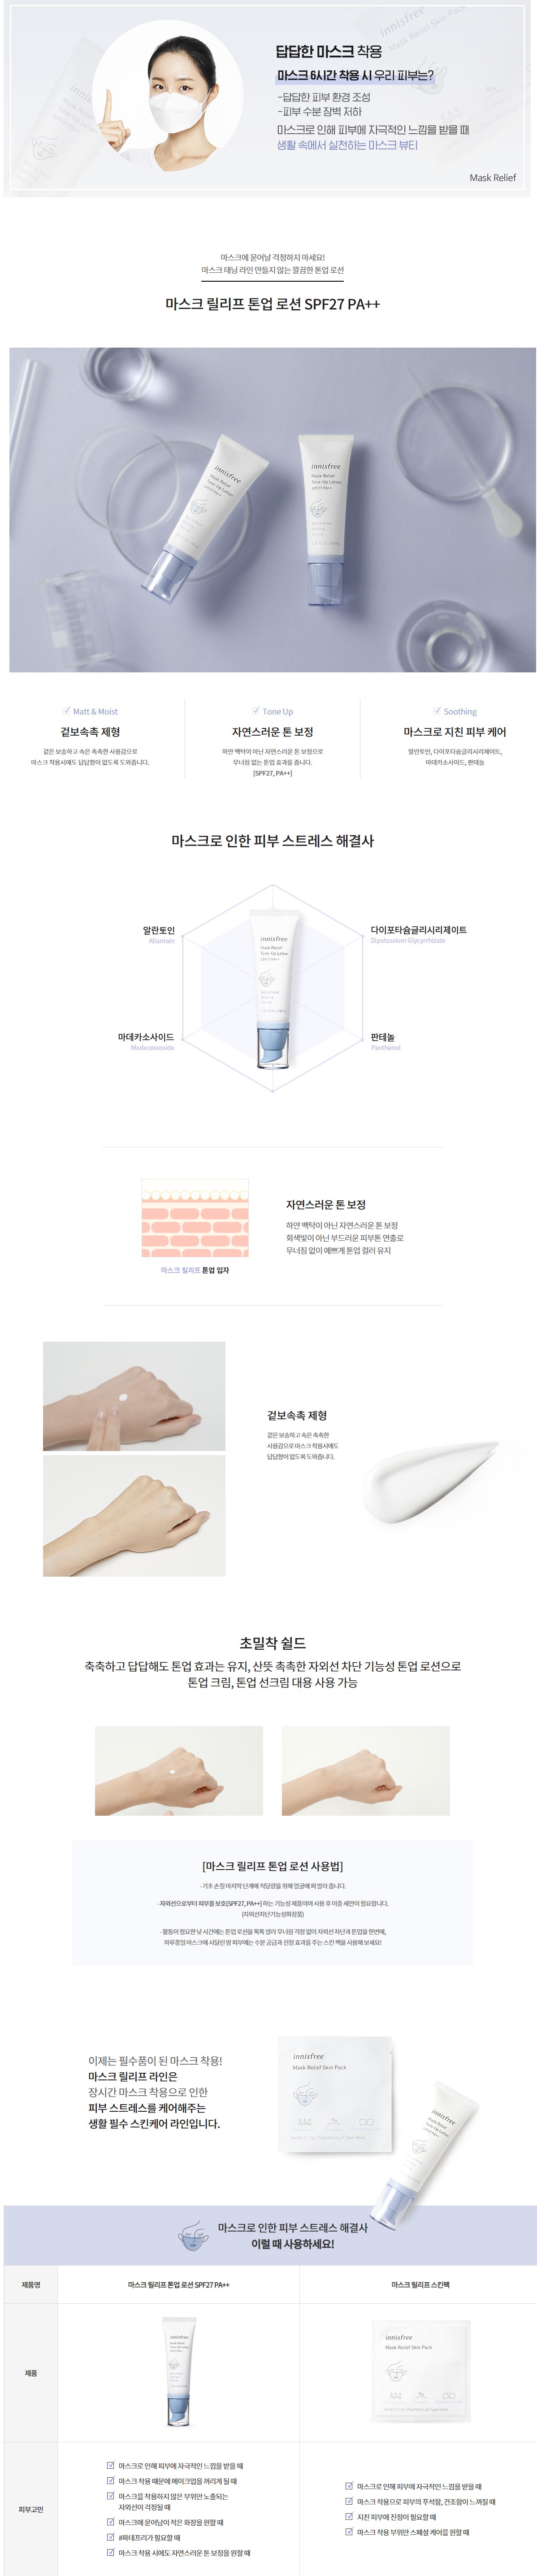 Innisfree,Innisfree Mask Relief Tone Up Lotion Spf27 Pa++ 40ml ,Innisfree Mask Relief Tone Up Lotion,Innisfree Mask Relief Tone Up Lotion รีวิว,